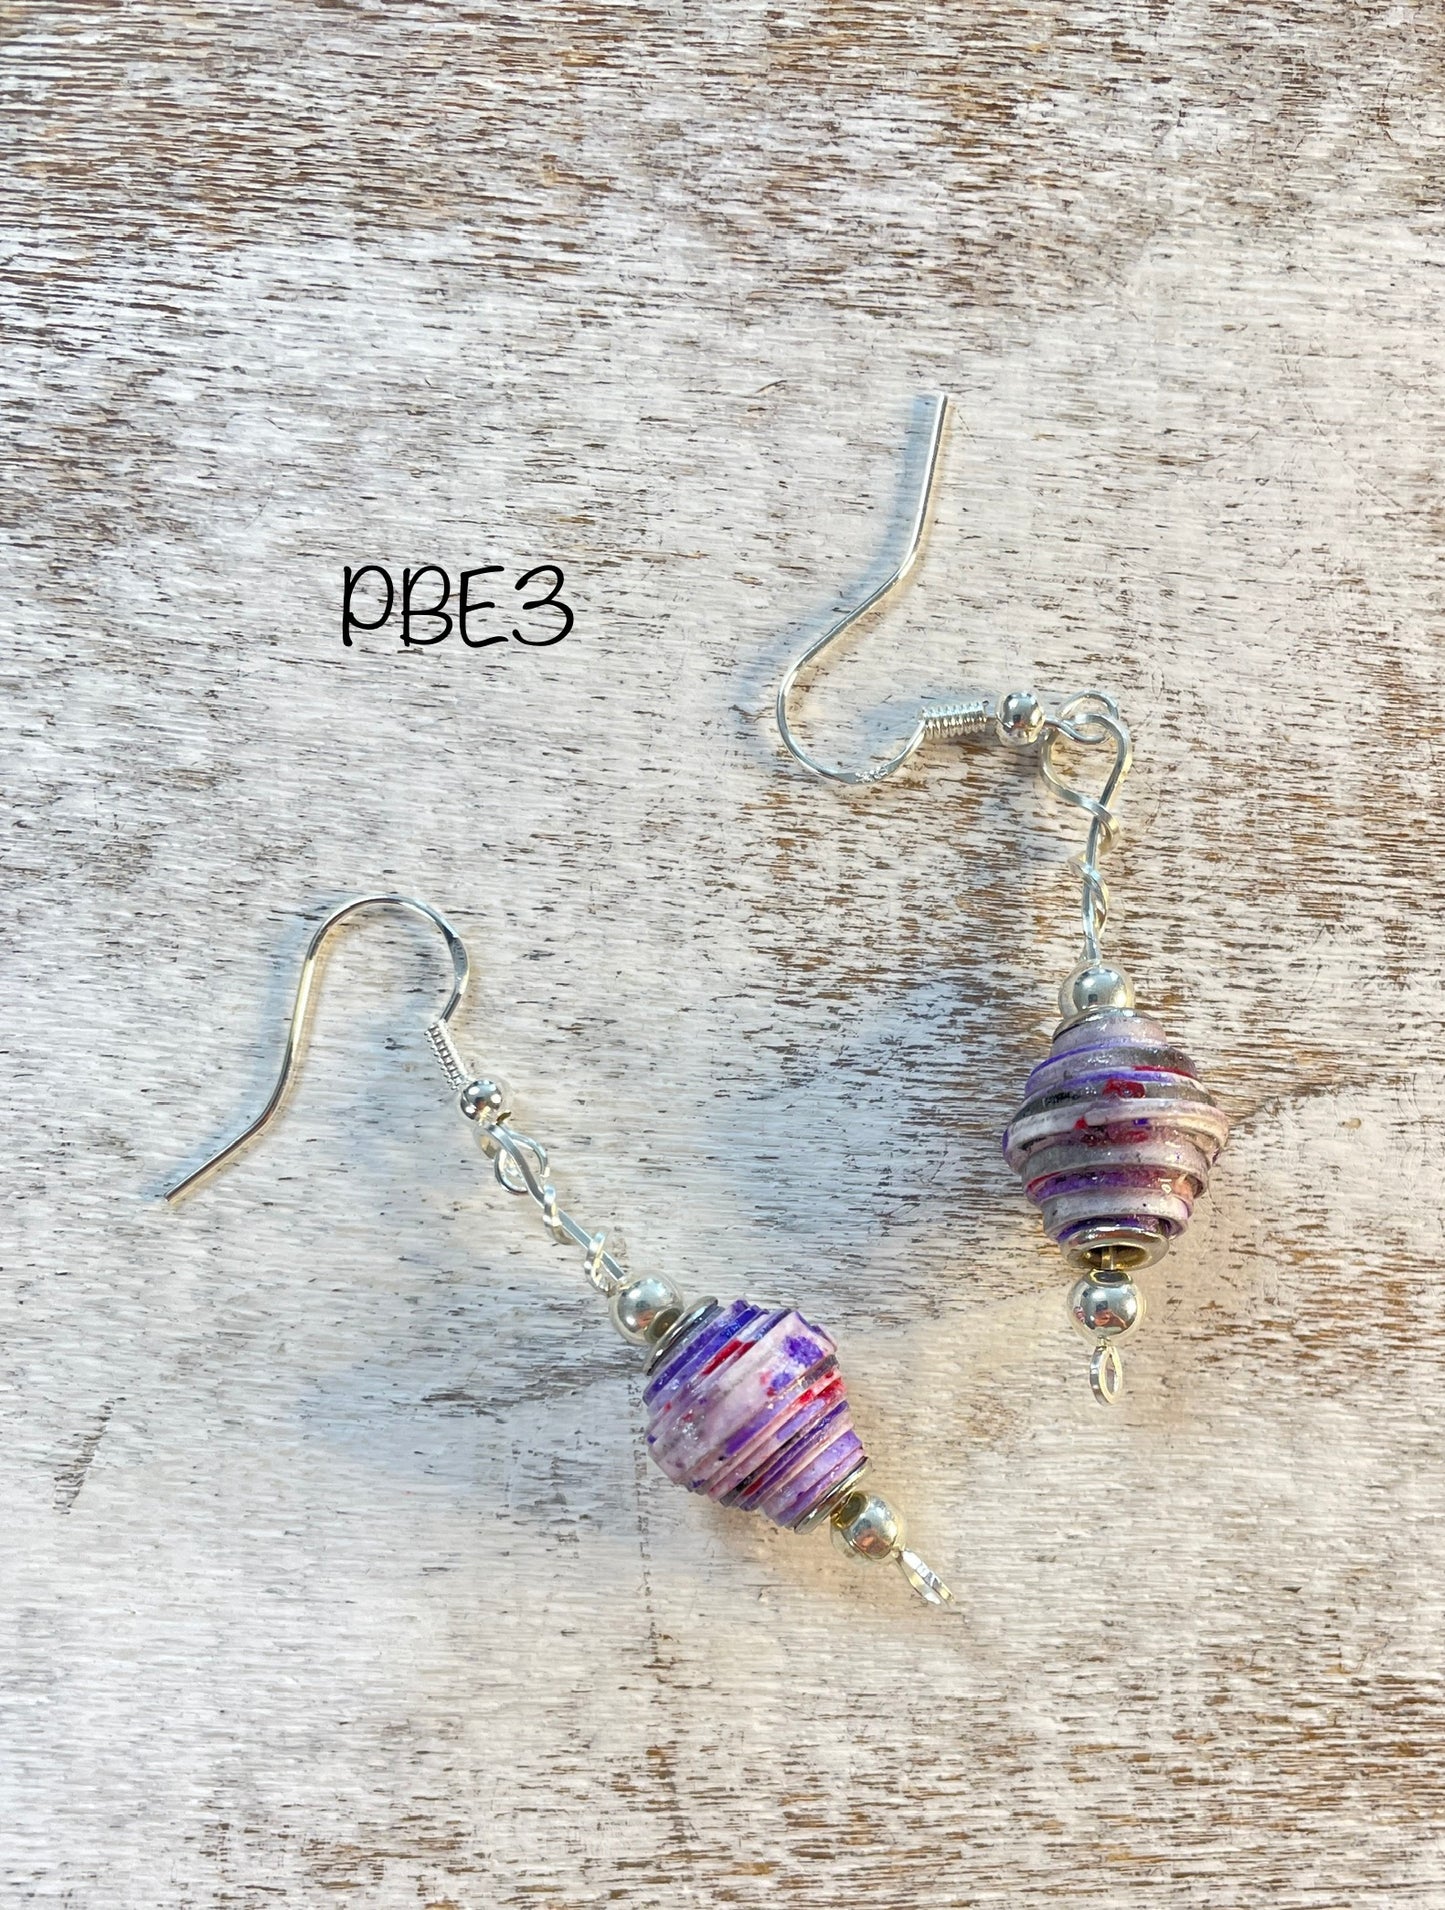 Paper Bead & Sterling Earrings “Mary Frances”